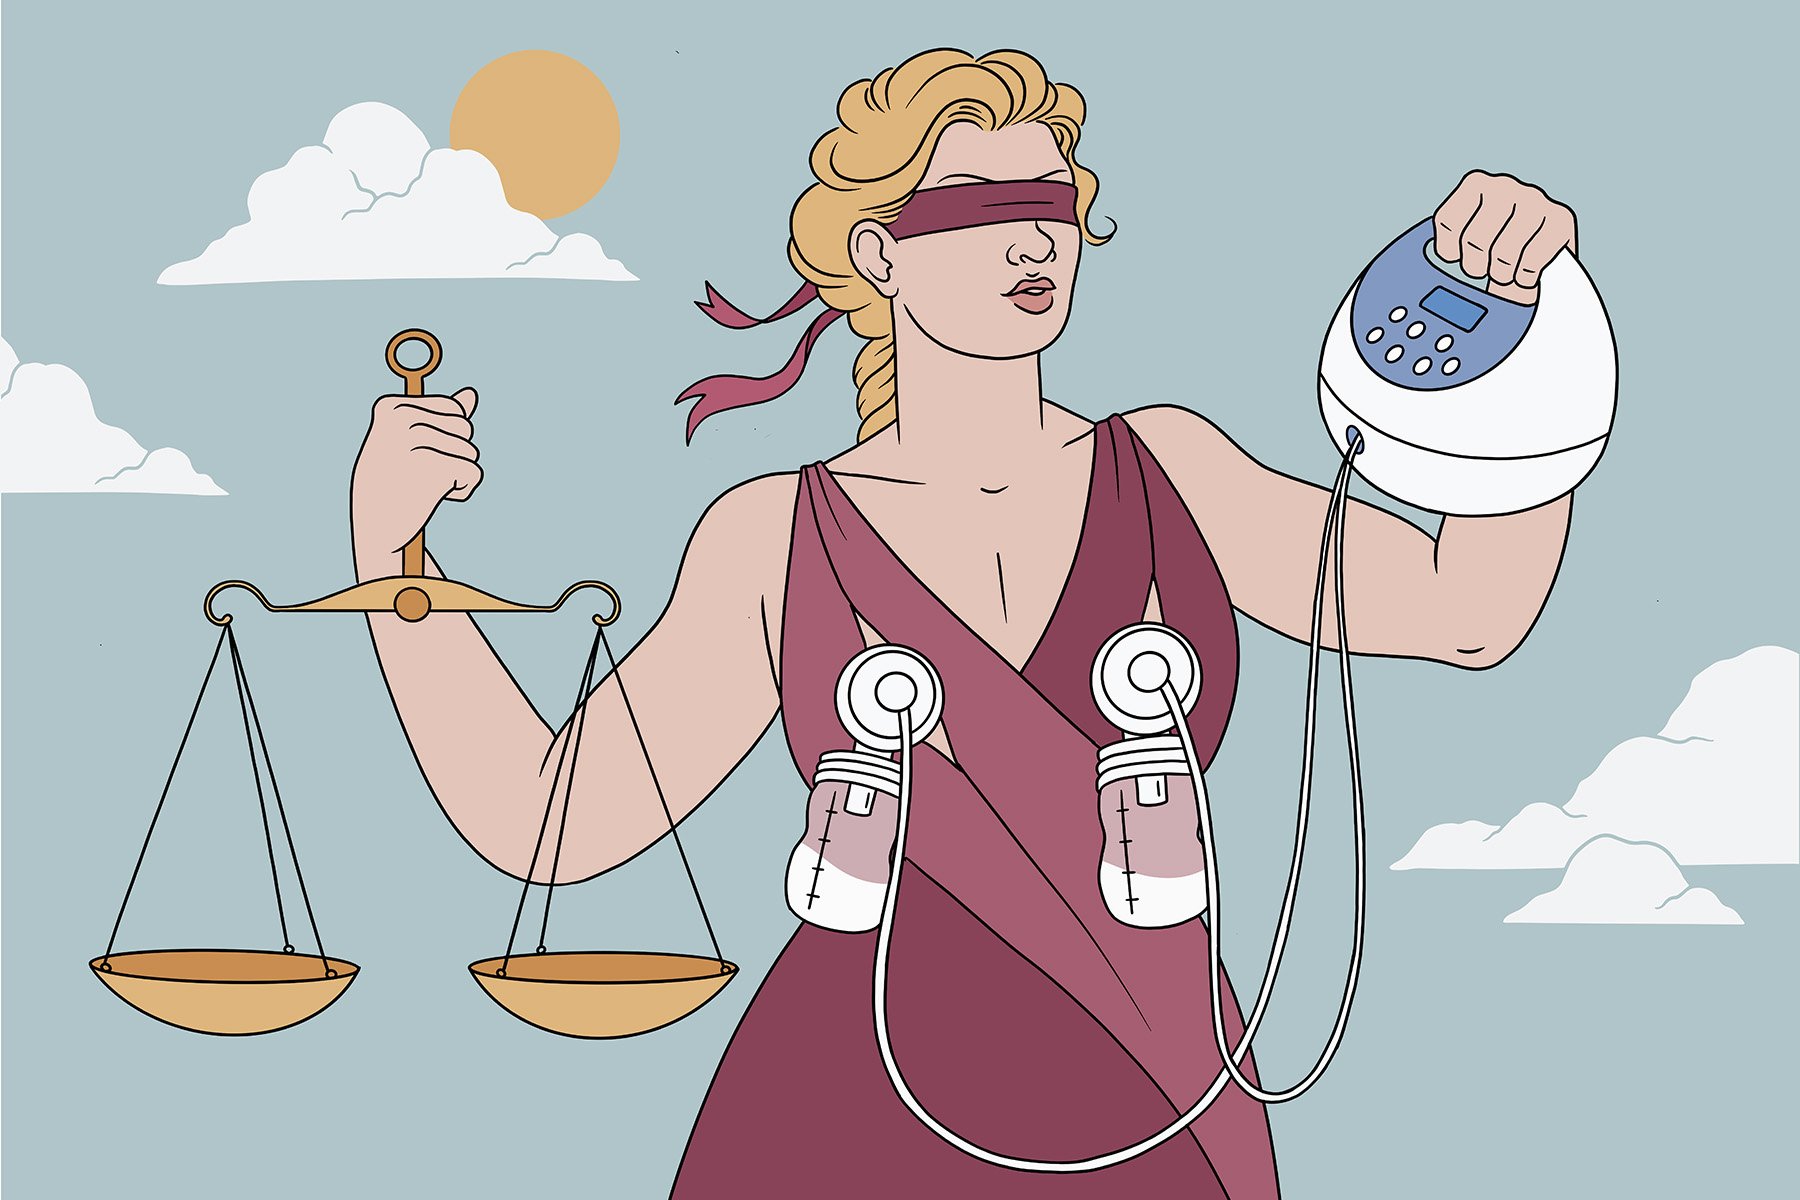 illustration of Lady Justice with scales in the left hand and a portable breast pump in the other. Two pumps are attached to her breasts.